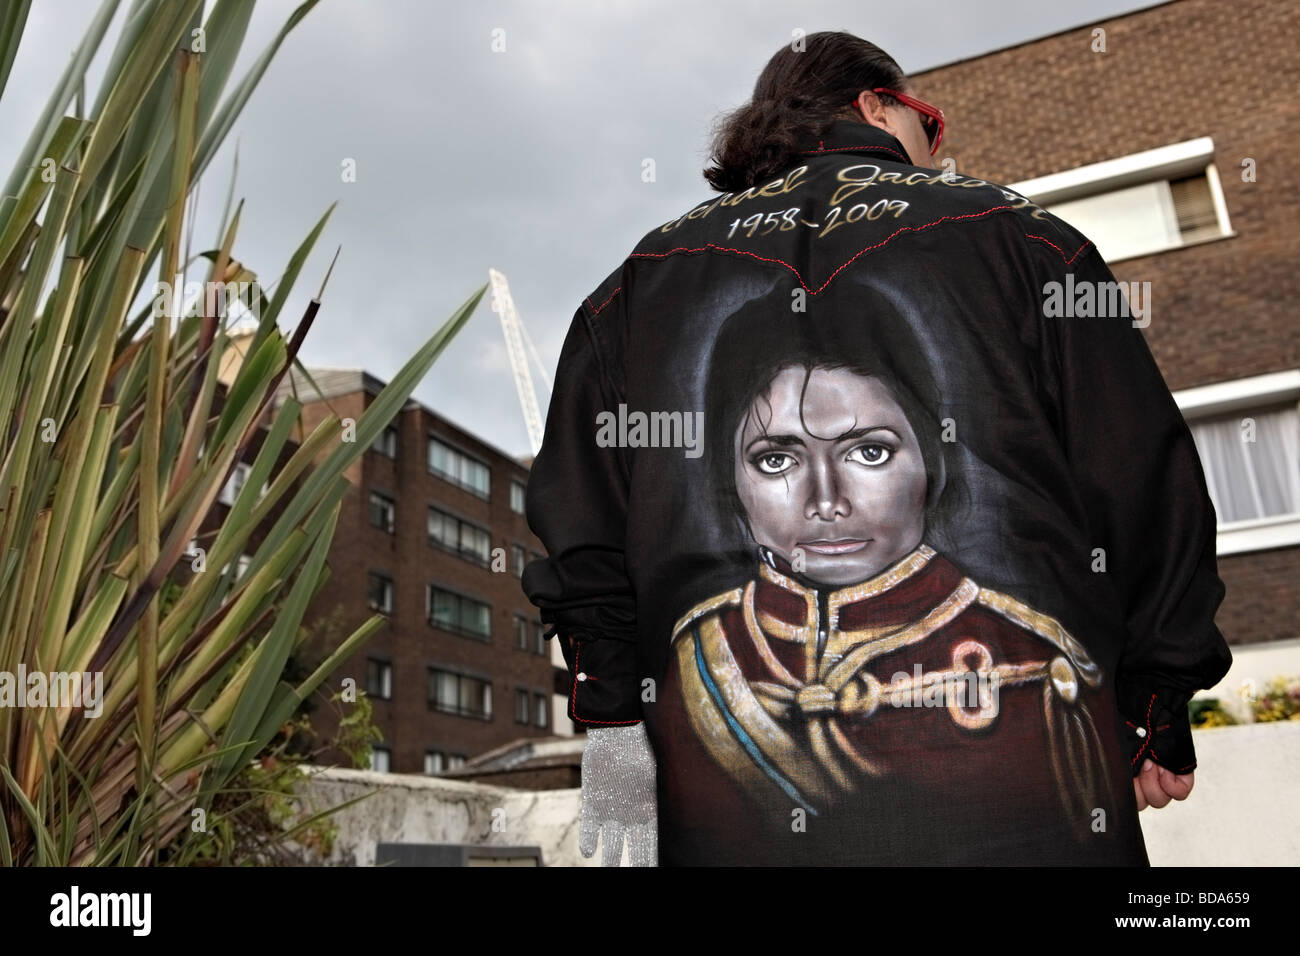 Michael Jackson's fan with customized black shirt in London West End. Stock Photo